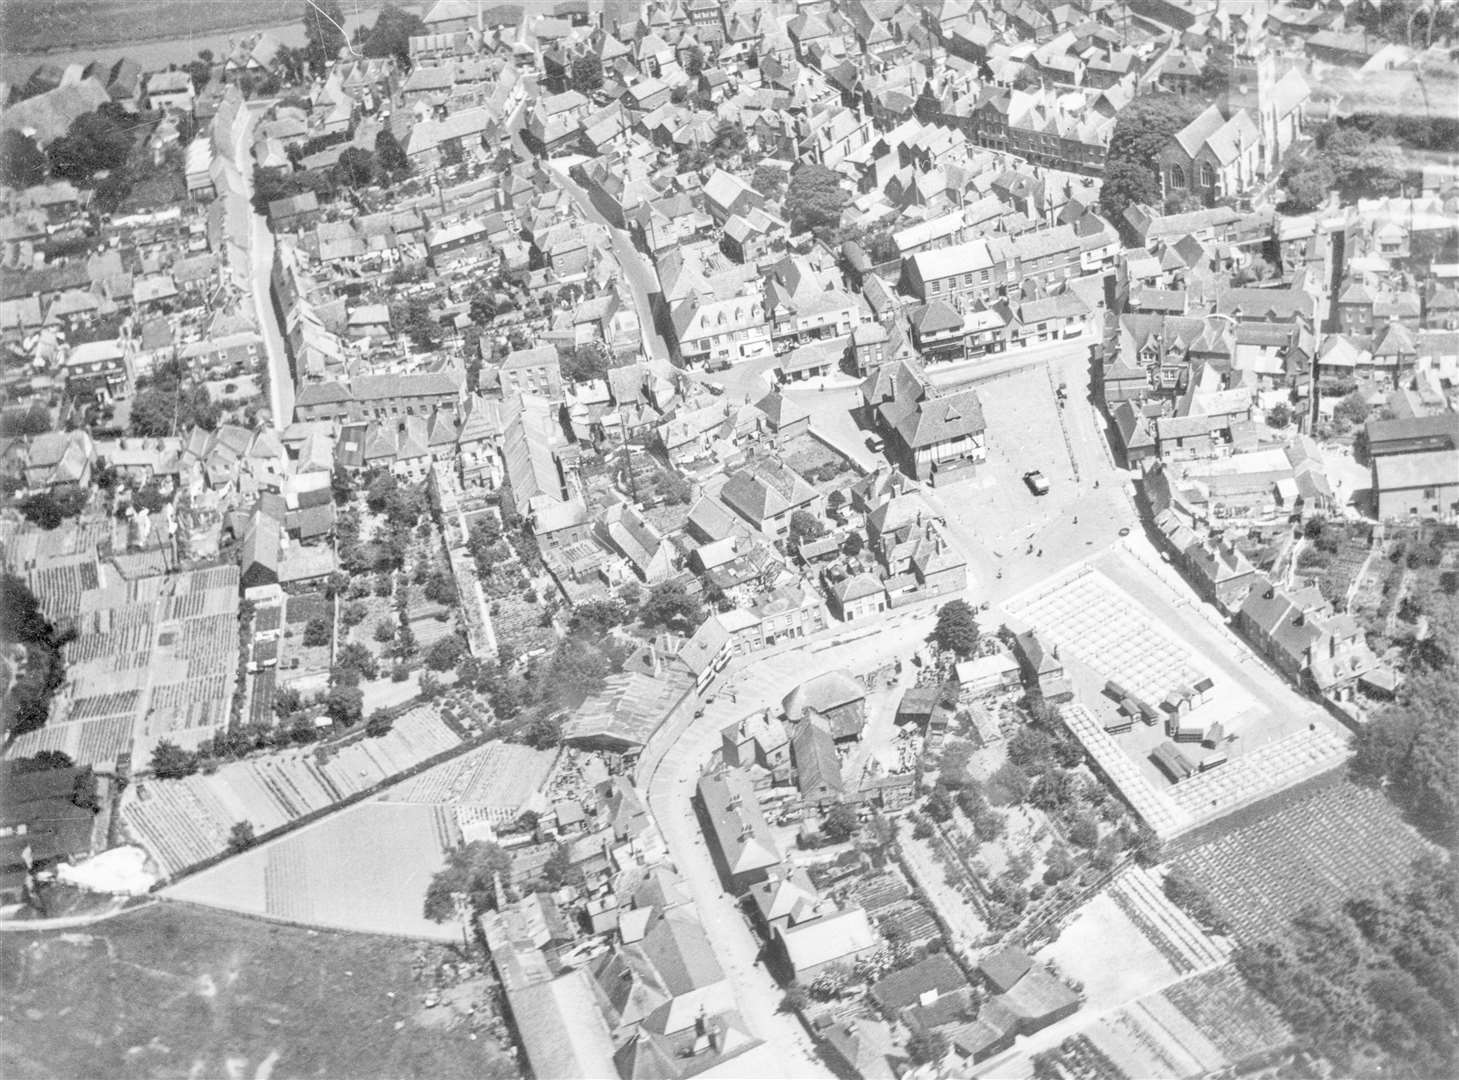 Looking down at the historic town of Sandwich in 1925. Picture: Historic England